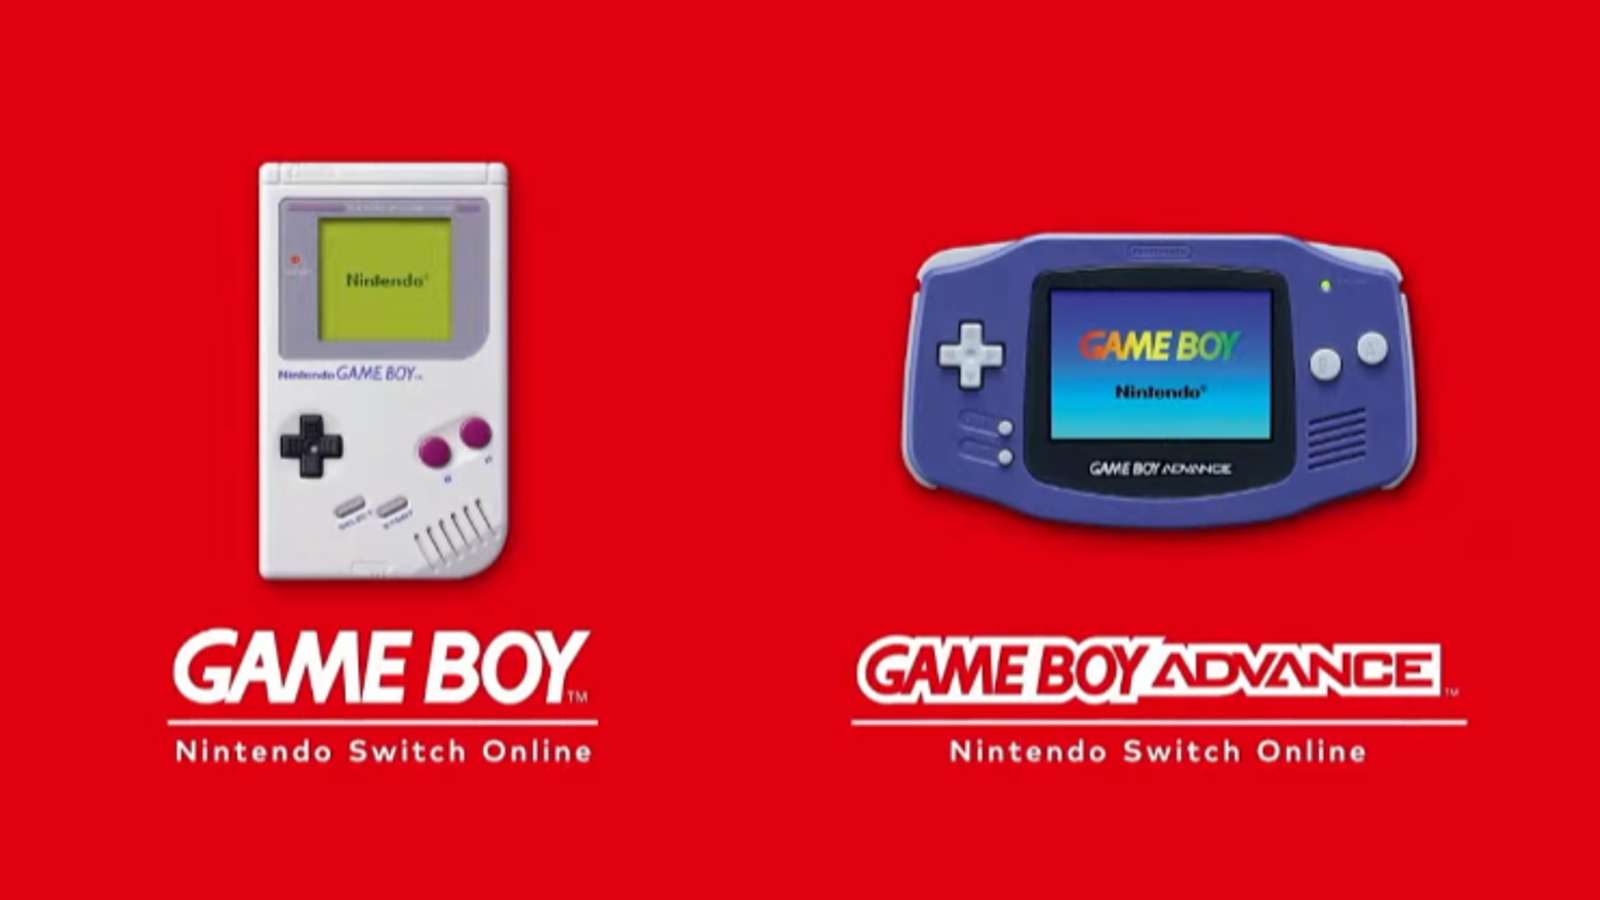 Nintendo Switch Online is bringing Gameboy, Gameboy Color, and Gameboy Advanced games into the modern day.